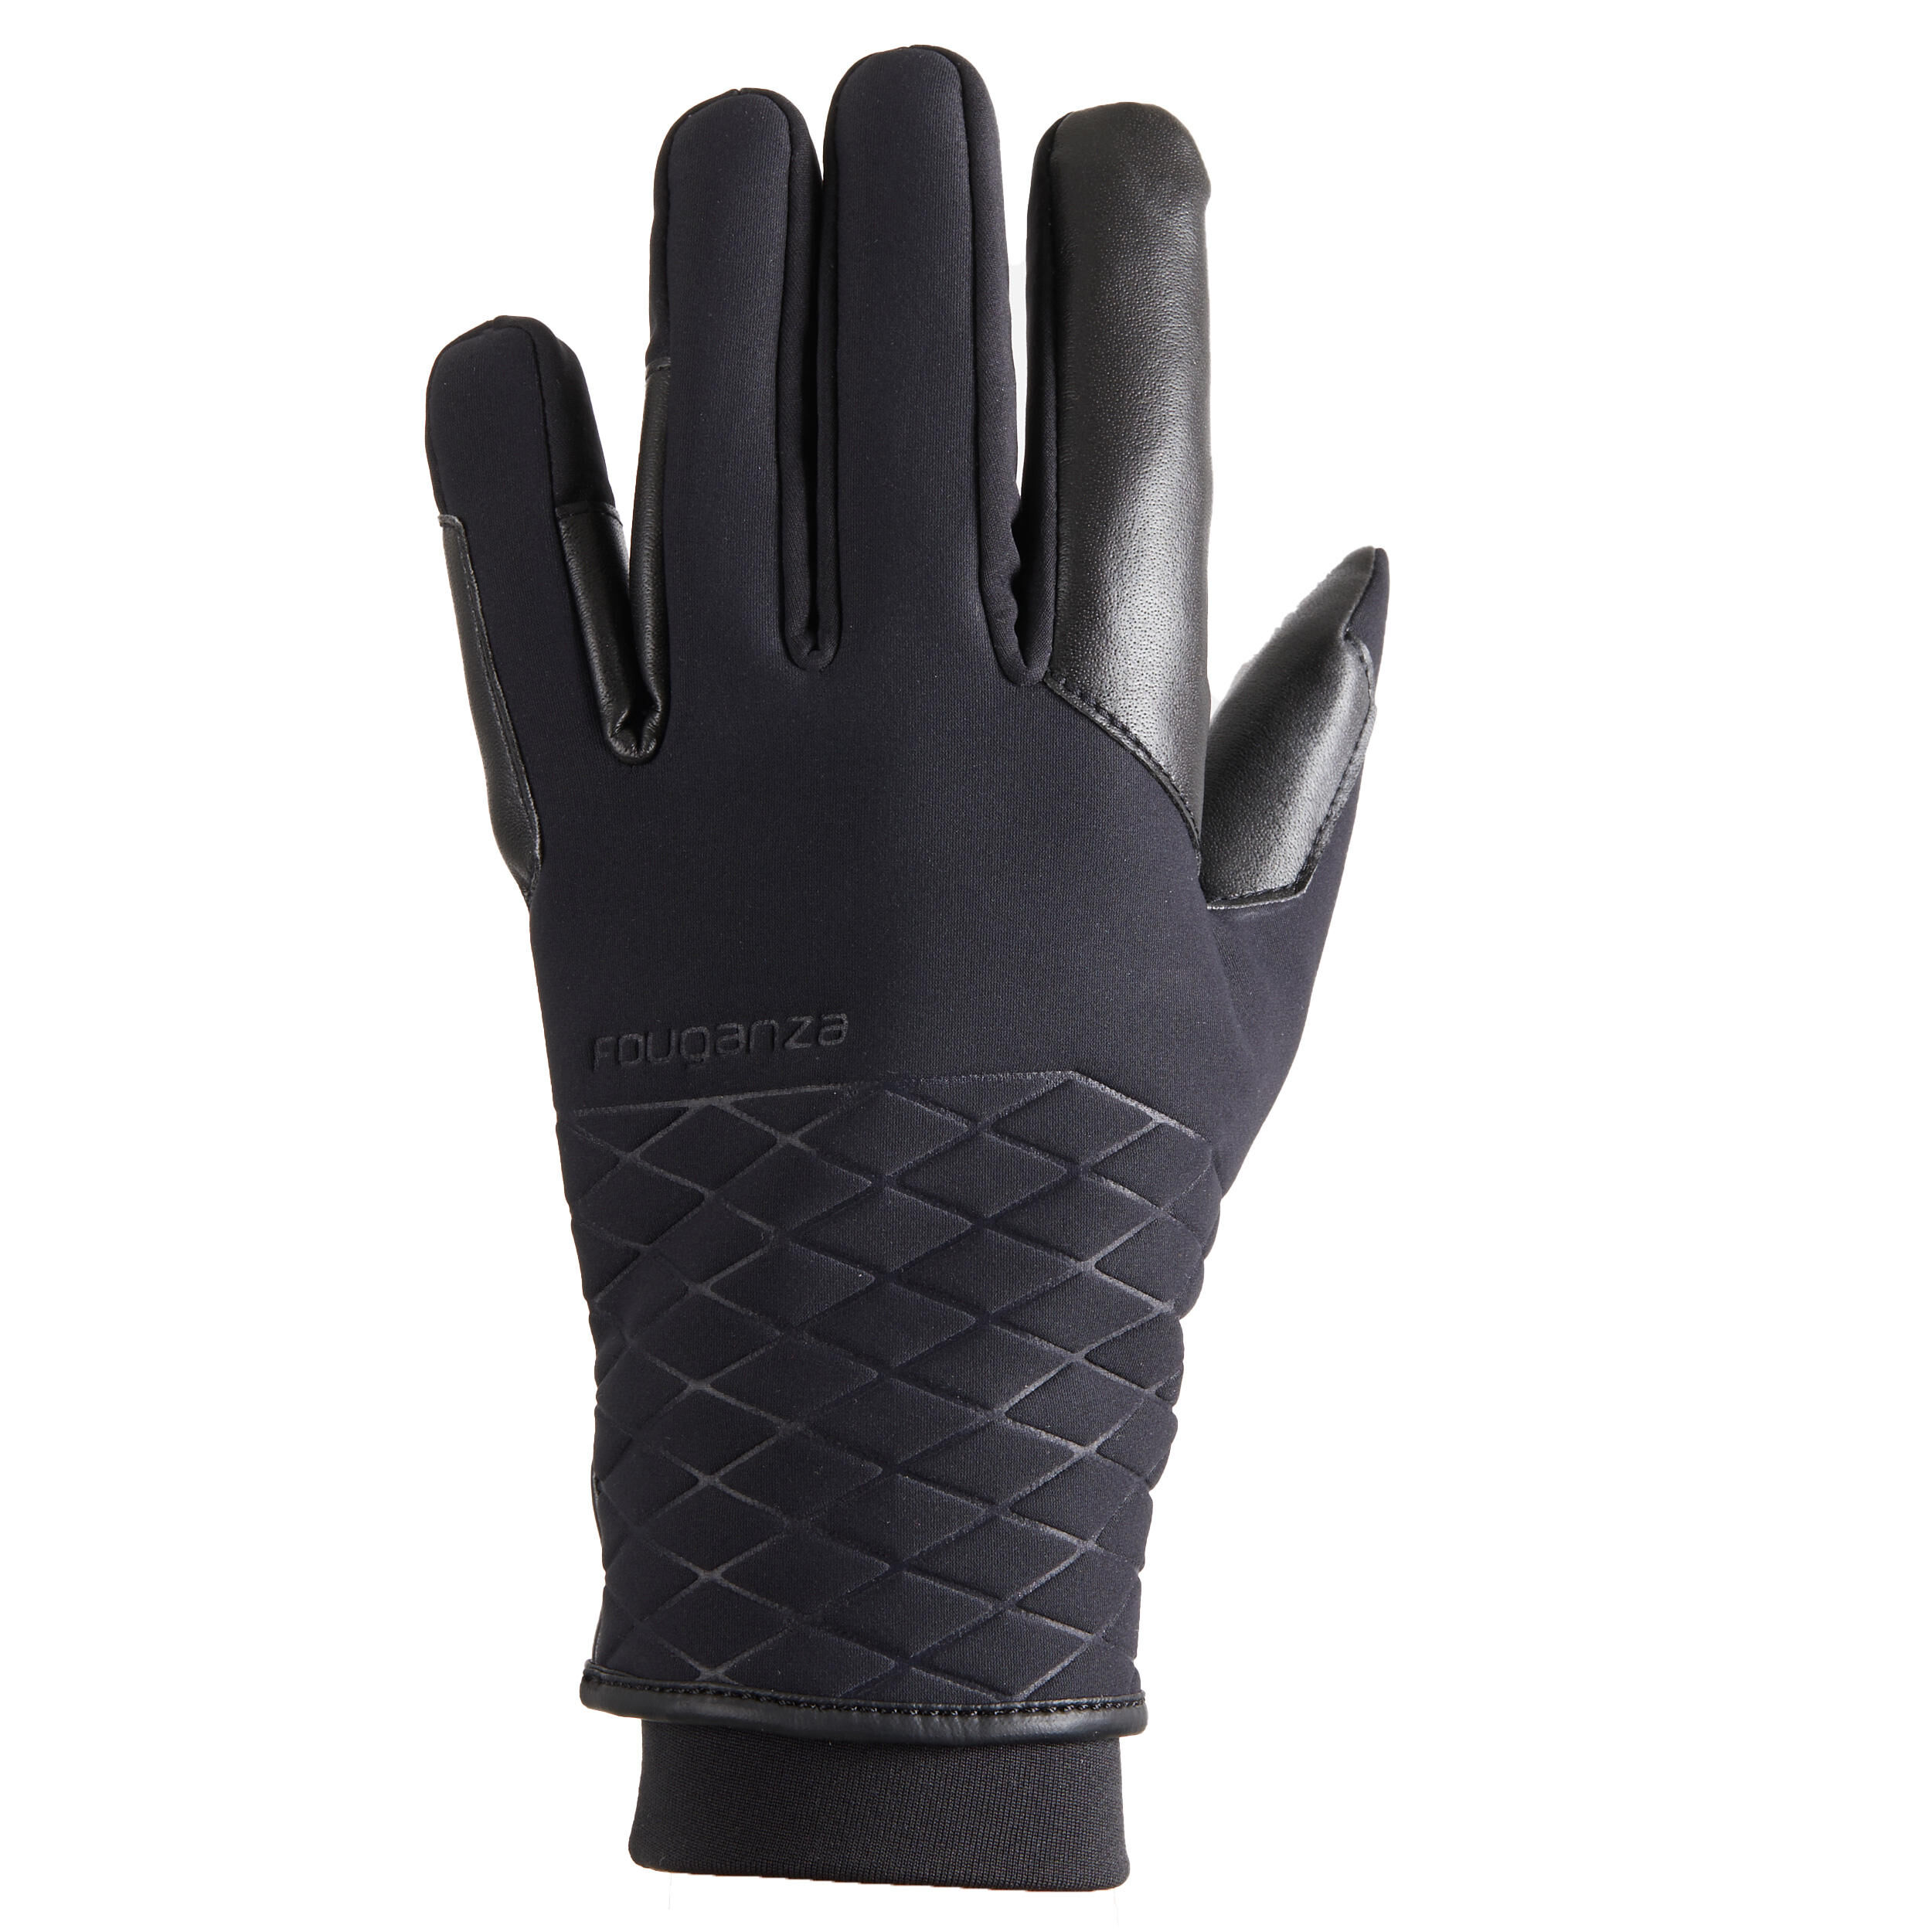 FOUGANZA Women's Warm and Waterproof Horse Riding Gloves 900 Warm - Black